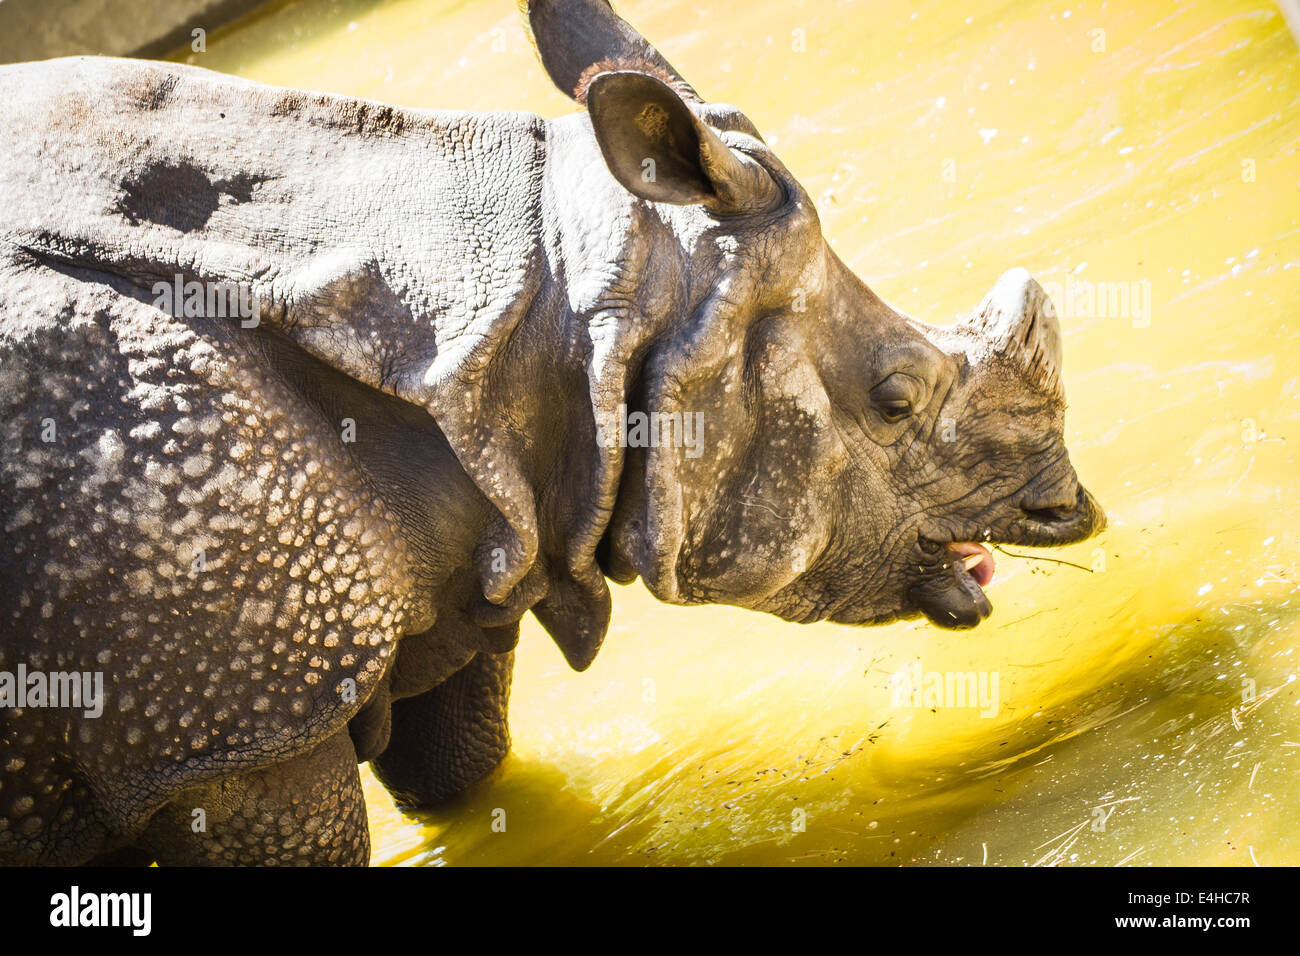 Indian rhino with huge horn and armor skin Stock Photo - Alamy